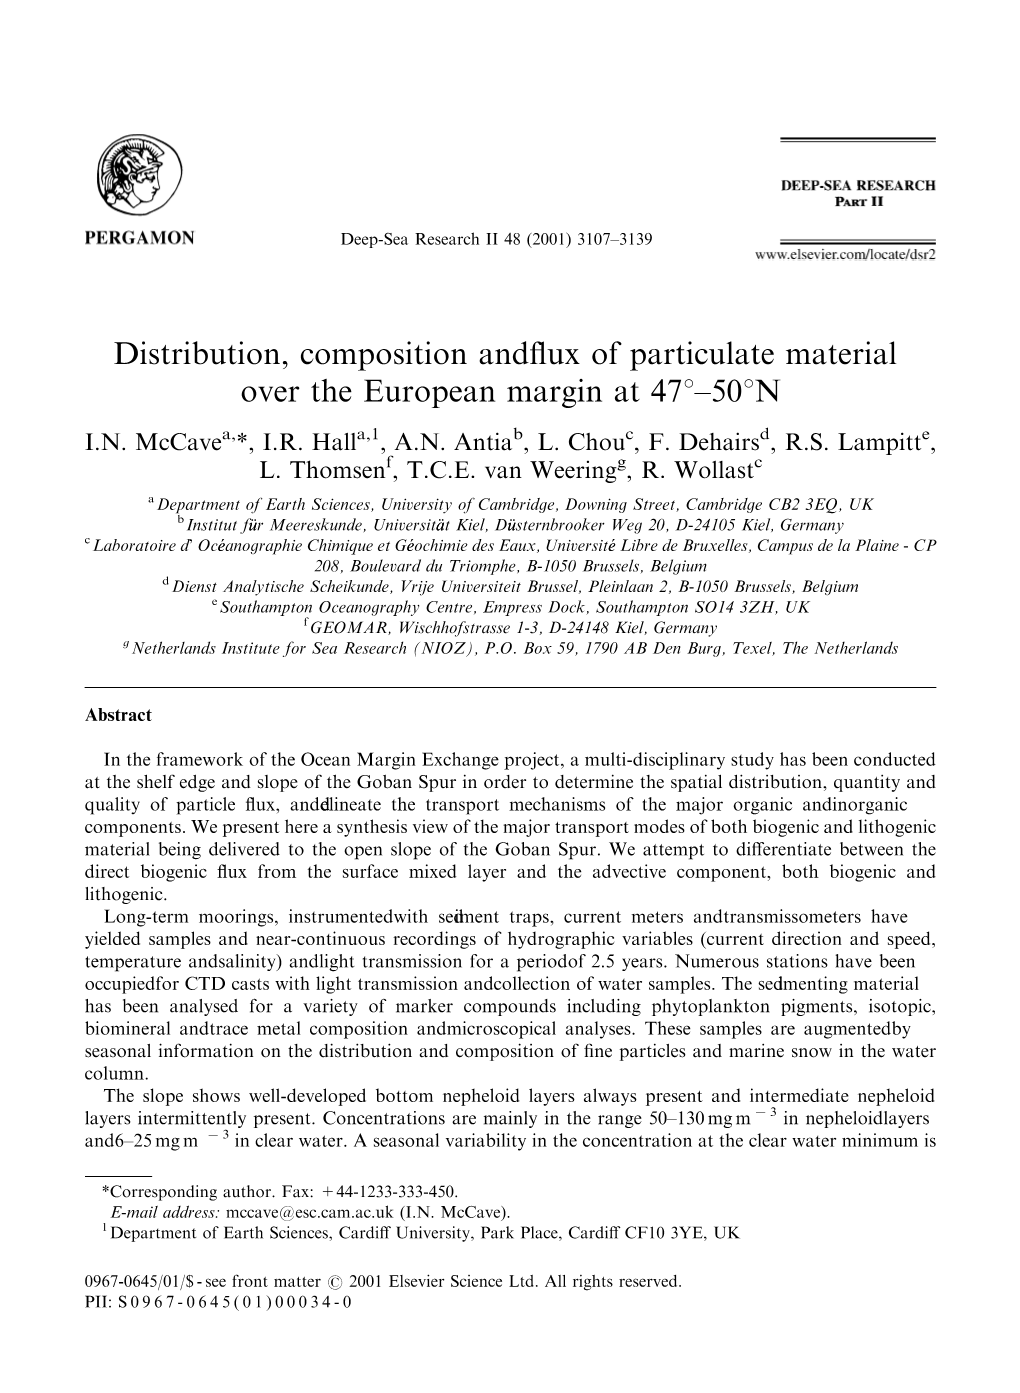 Distribution, Composition and Flux of Particulate Material Over The